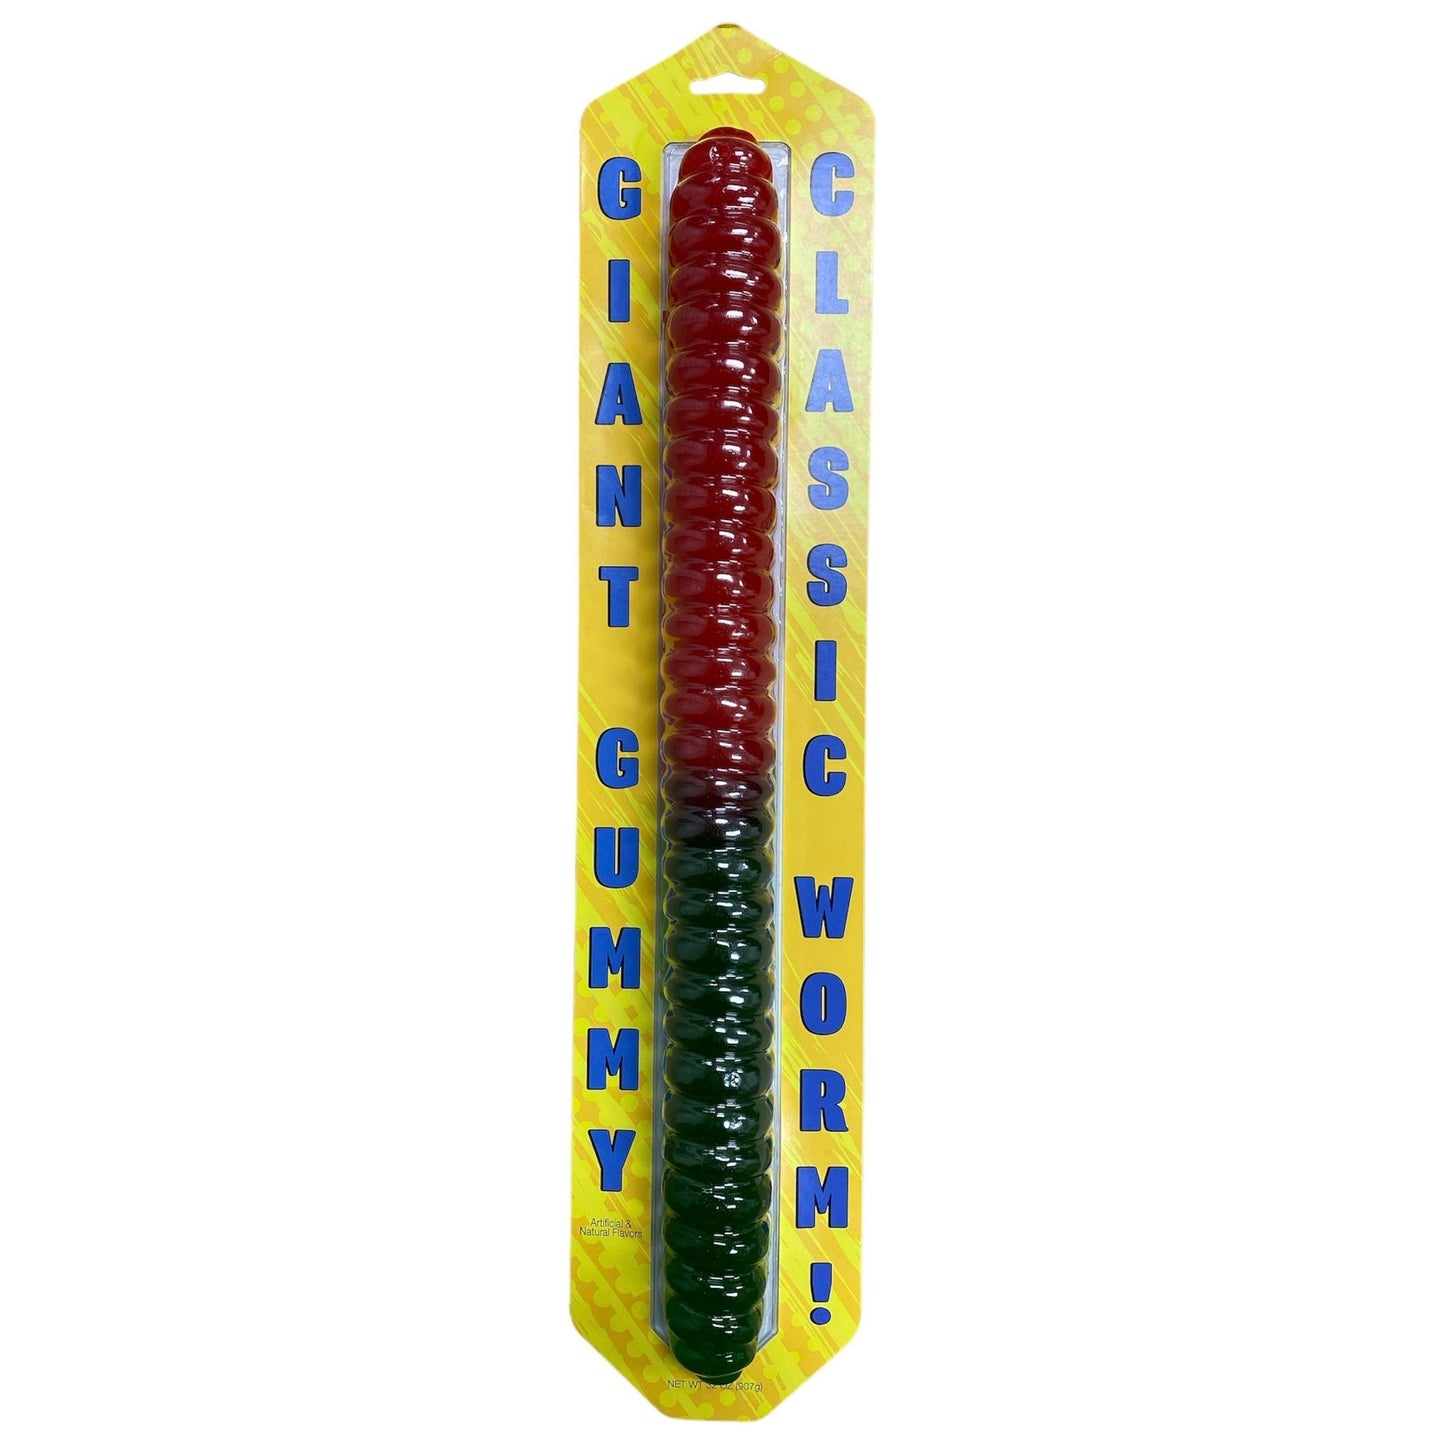 World's Largest Gummy Worm Cherry / Sour Apple 26 Inches 2lb 1ct (NEW BLISTER PACKAGING)